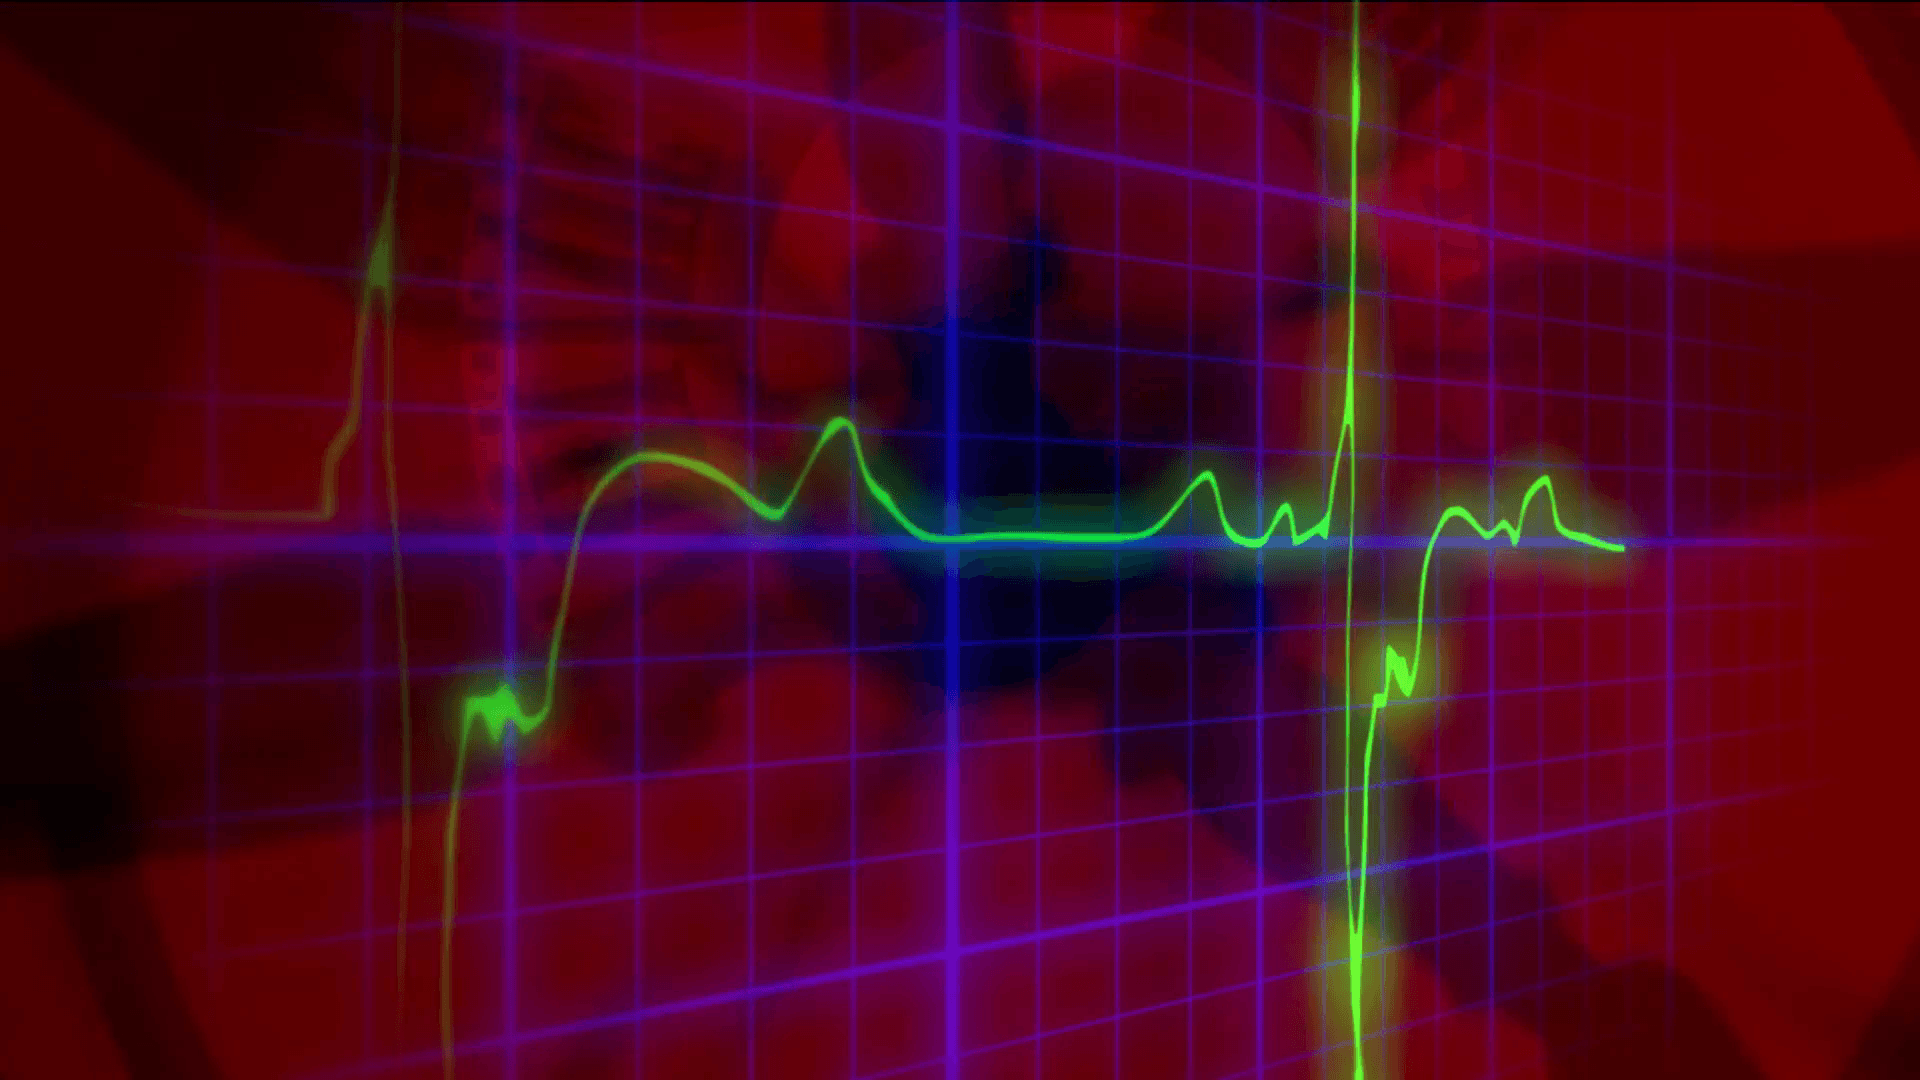 EKG heartbeat 3D crazy clocks. Red silhouettes of clocks going